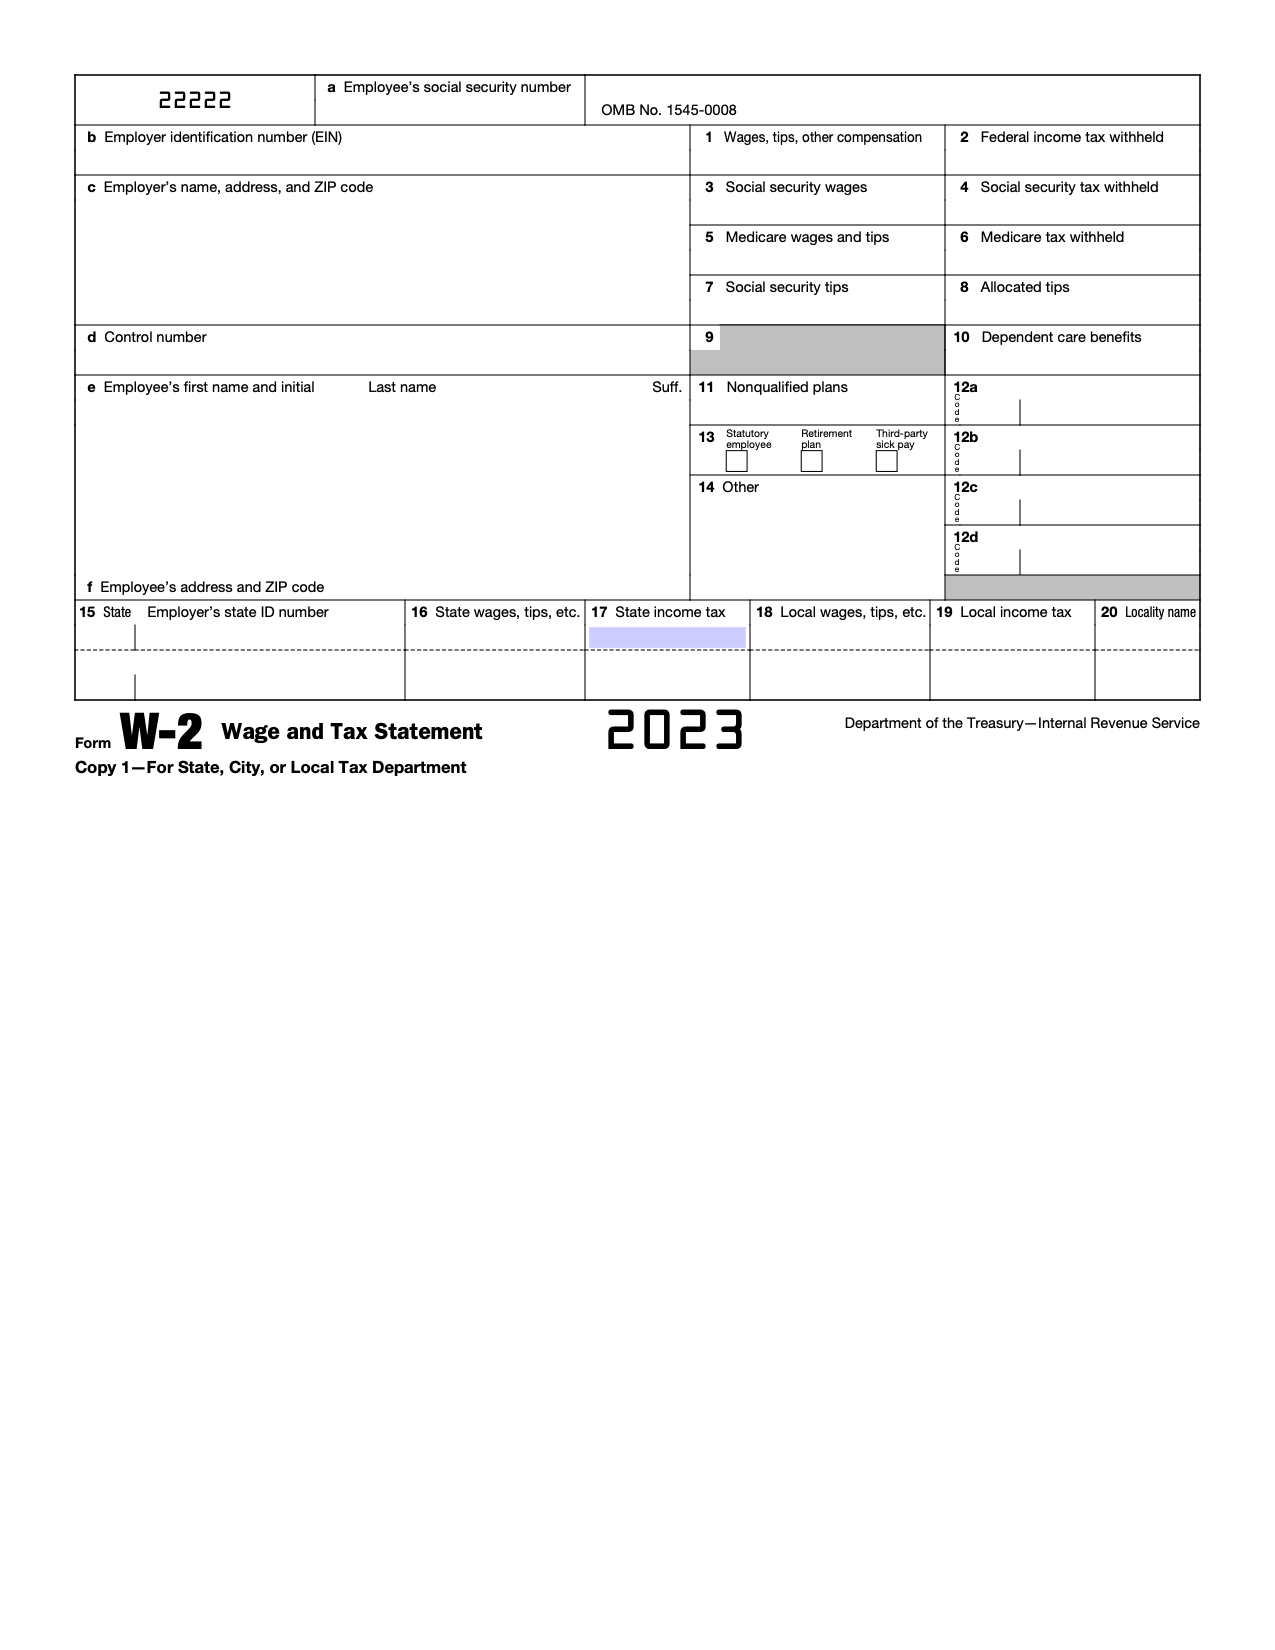 Free Irs Form W-2 | Wage And Tax Statement - Pdf – Eforms intended for W2 Form Printable